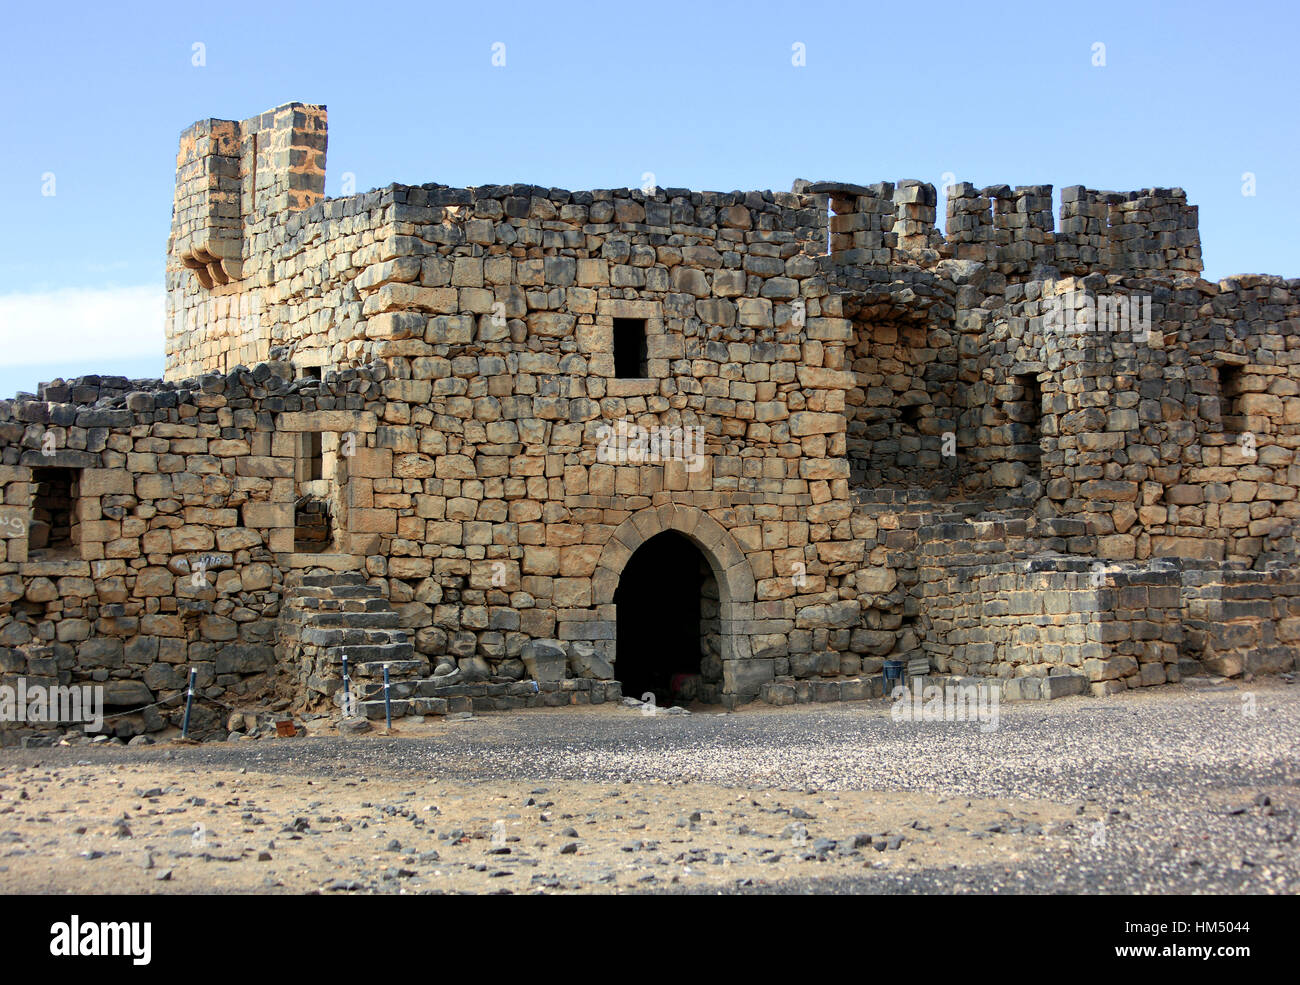 Qasr al-Azraq, Blue Fortress, a large fortress located in Jordan. It is one of the desert castles Stock Photo